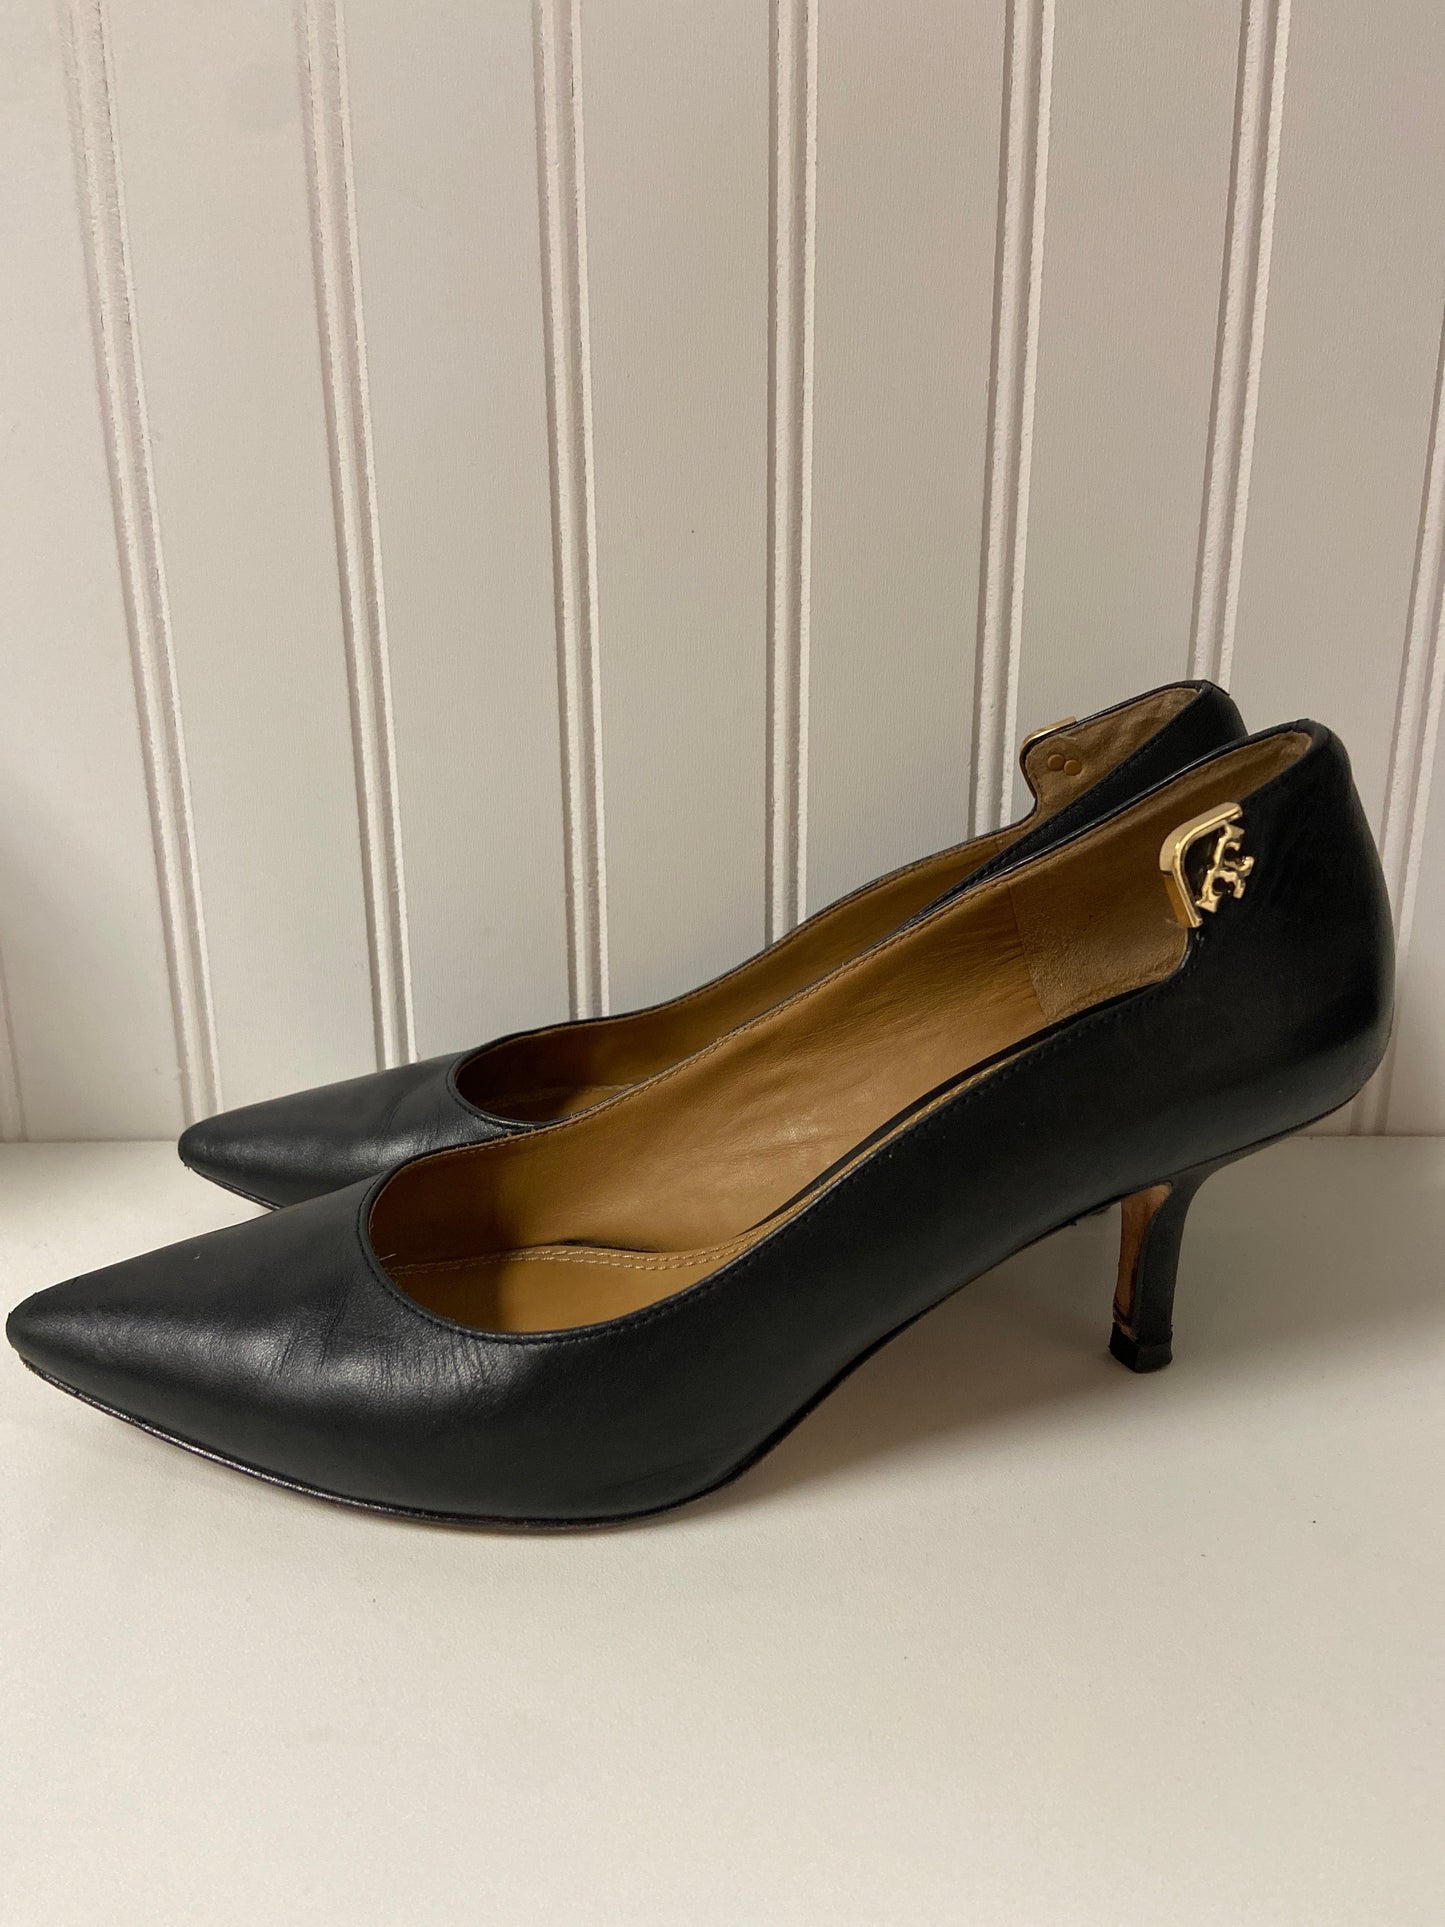 Shoes Heels Stiletto By Tory Burch  Size: 6.5